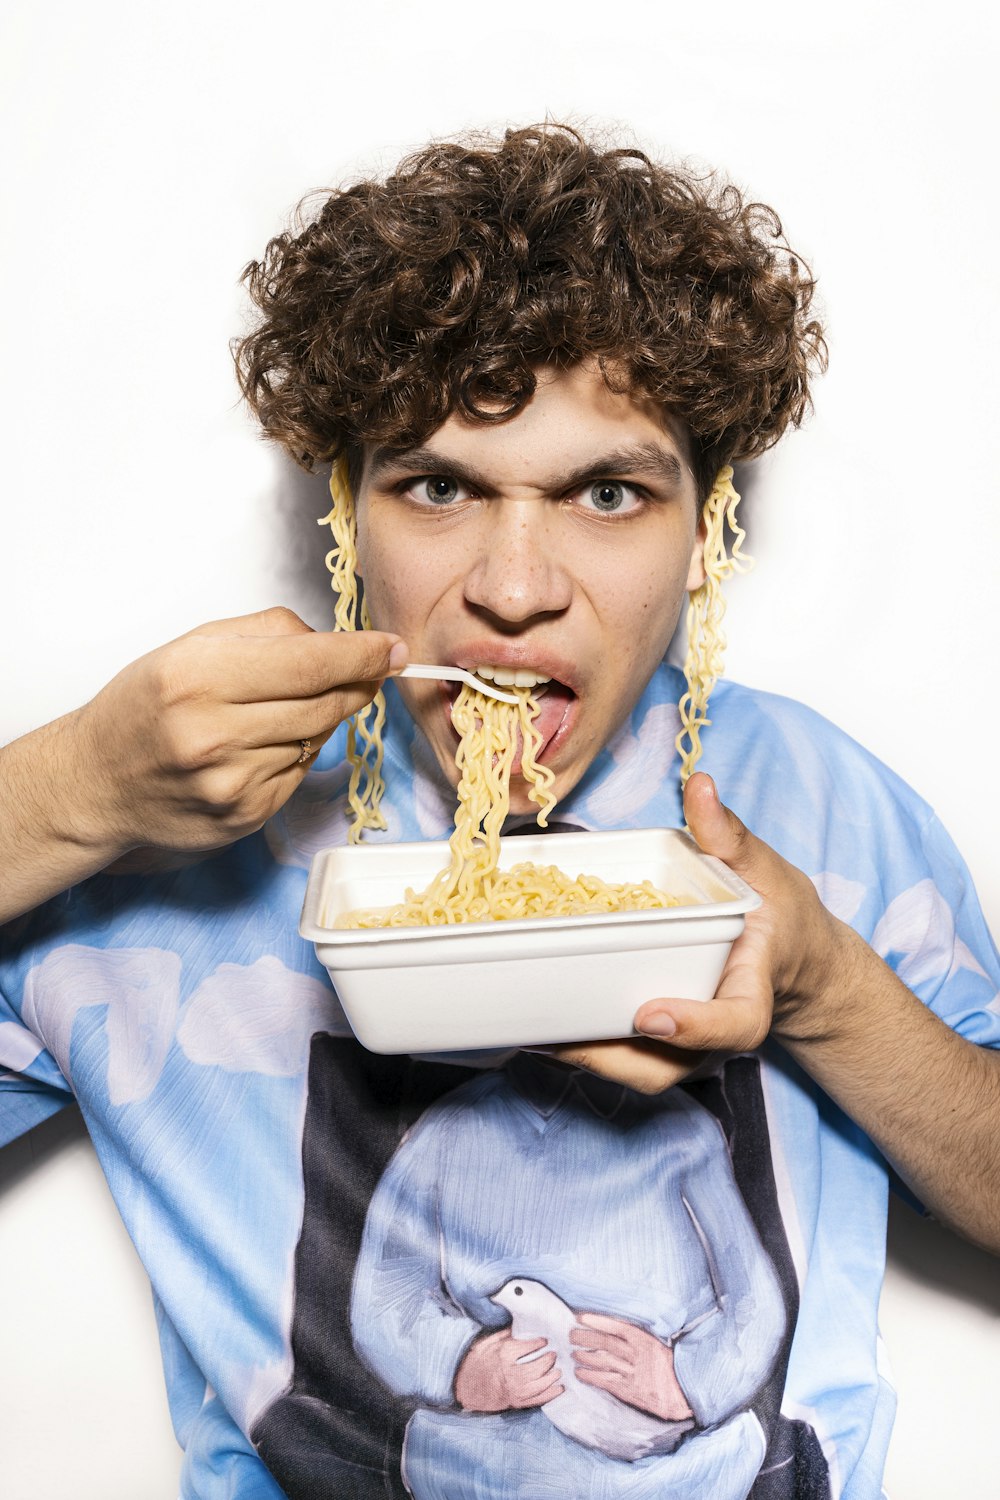 a man with curly hair eating a bowl of noodles